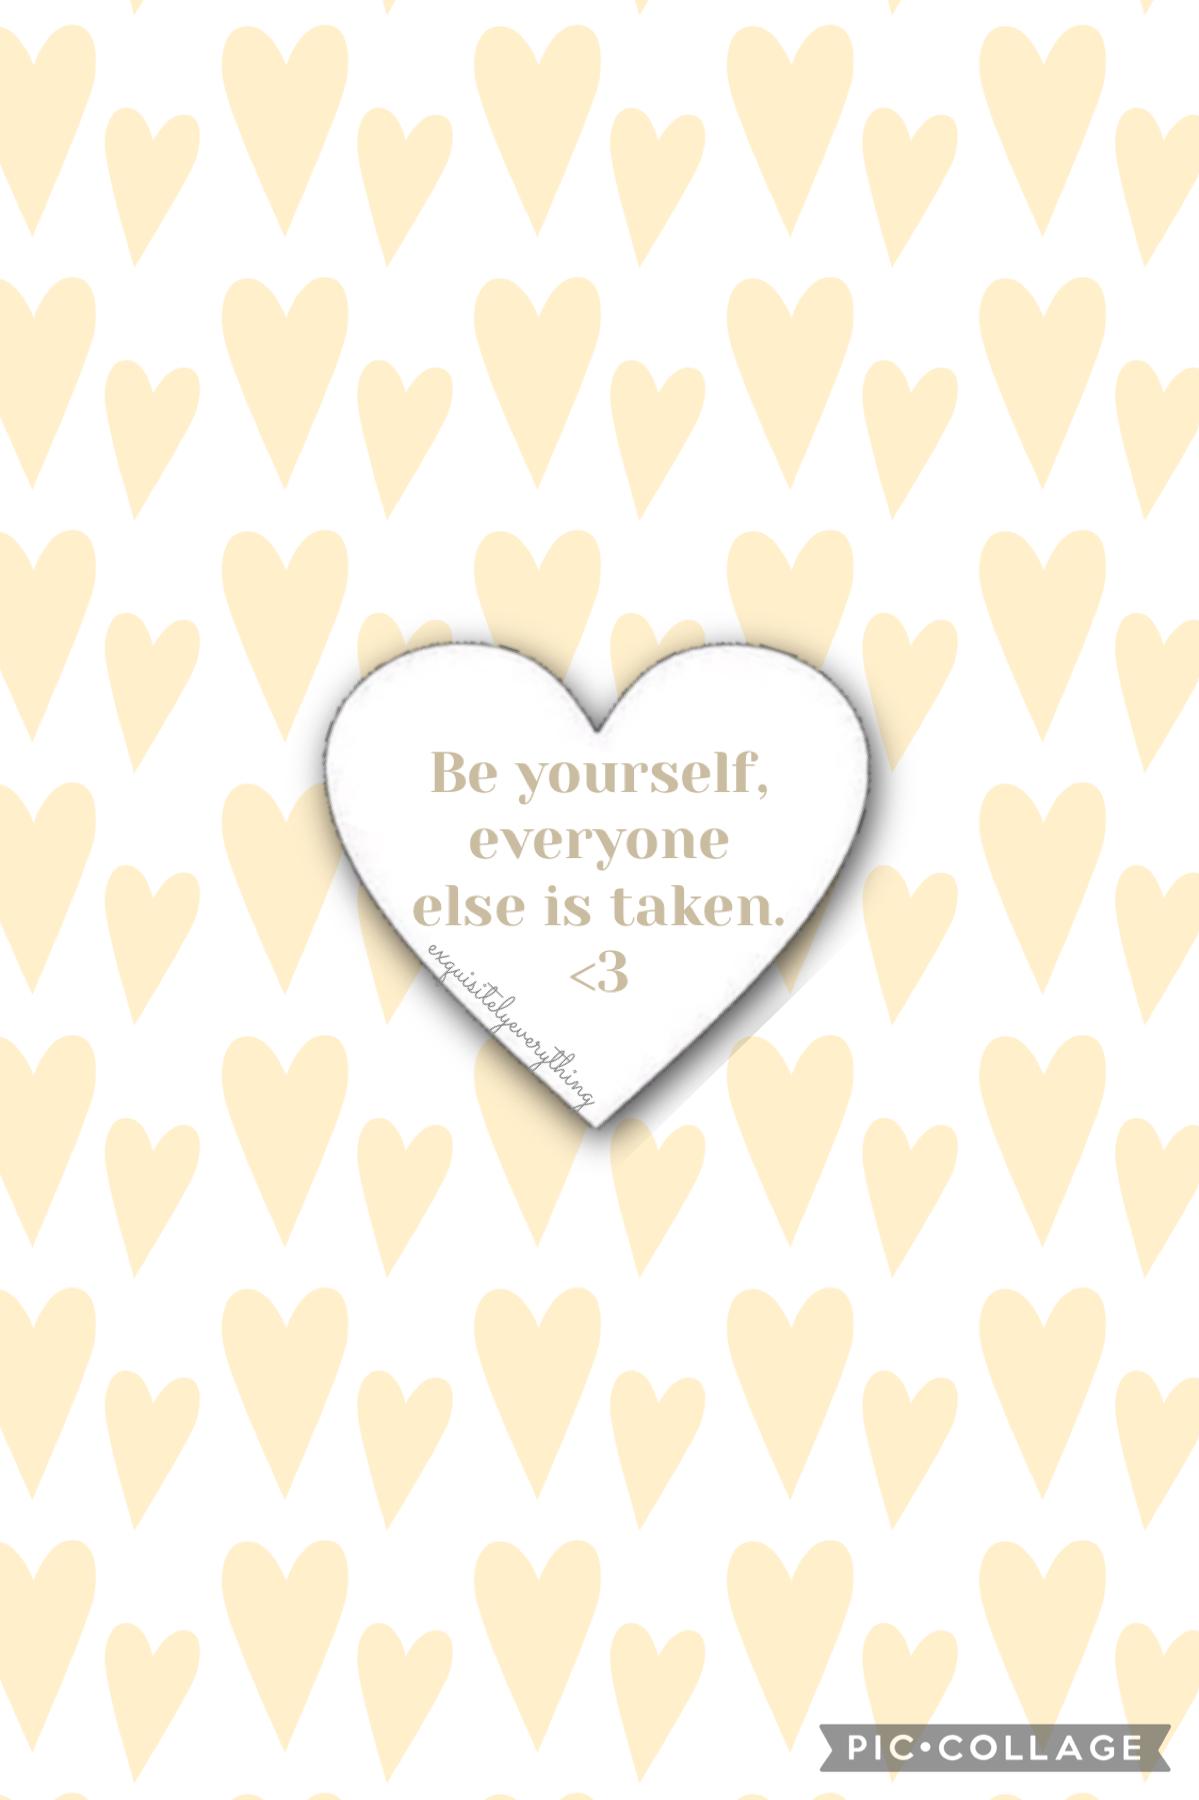 Be yourself, everyone else is taken. 